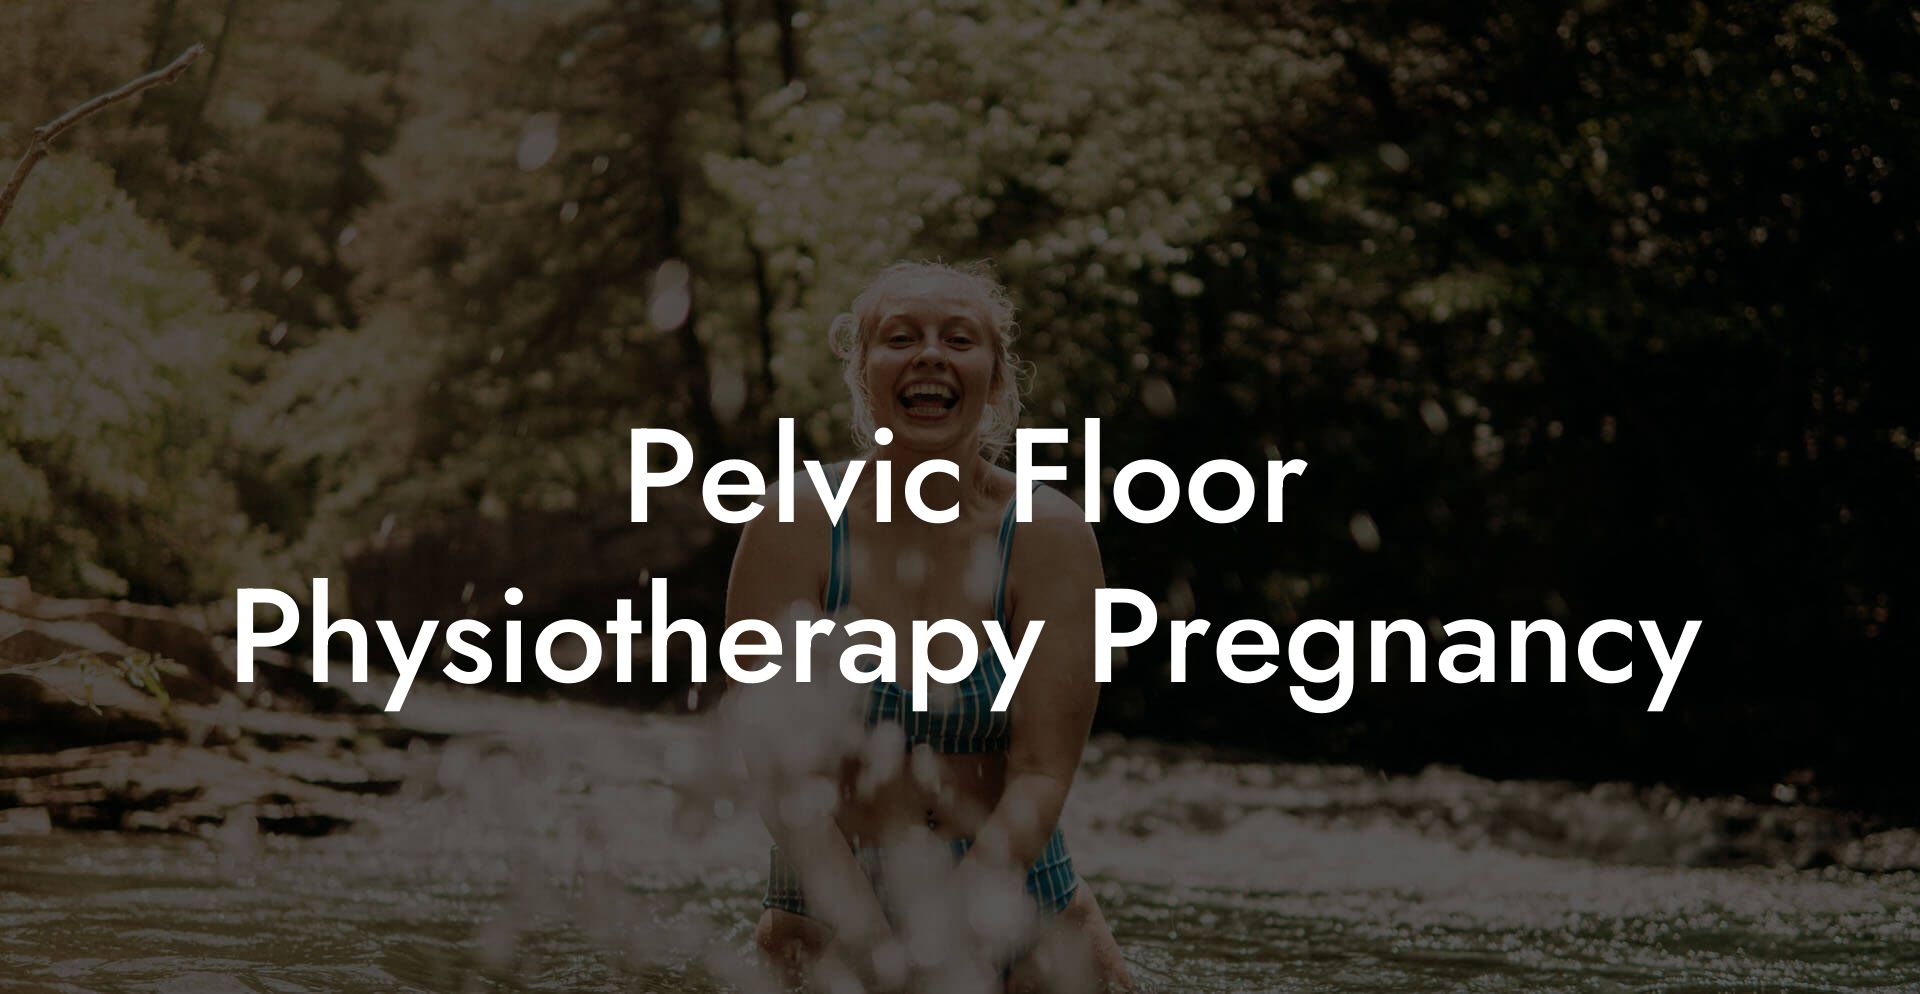 Pelvic Floor Physiotherapy Pregnancy